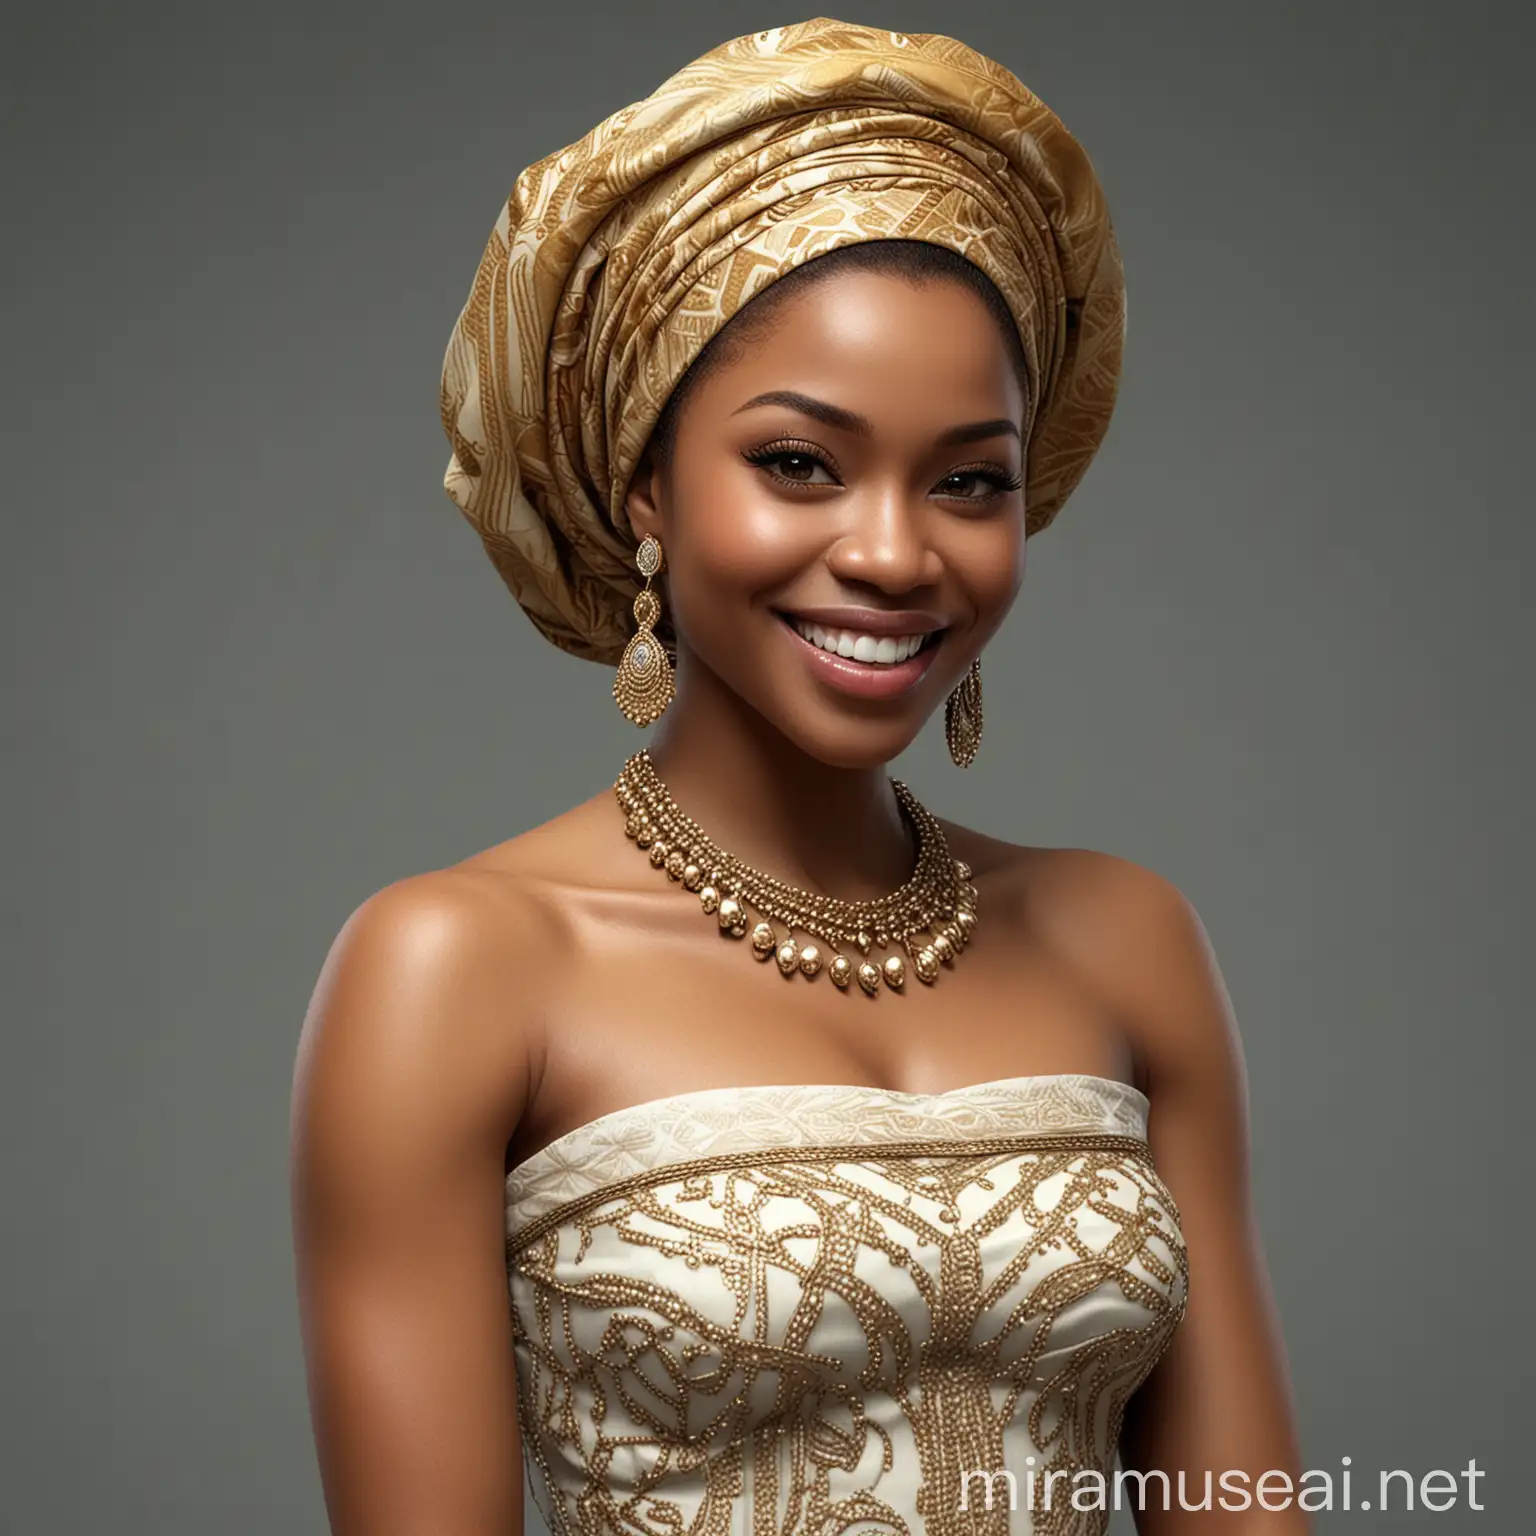 very beautiful, light skinned, sexy Nigerian queen, smiling, very attractive , full body shot, detailed eyes, photorealistic, very great detail